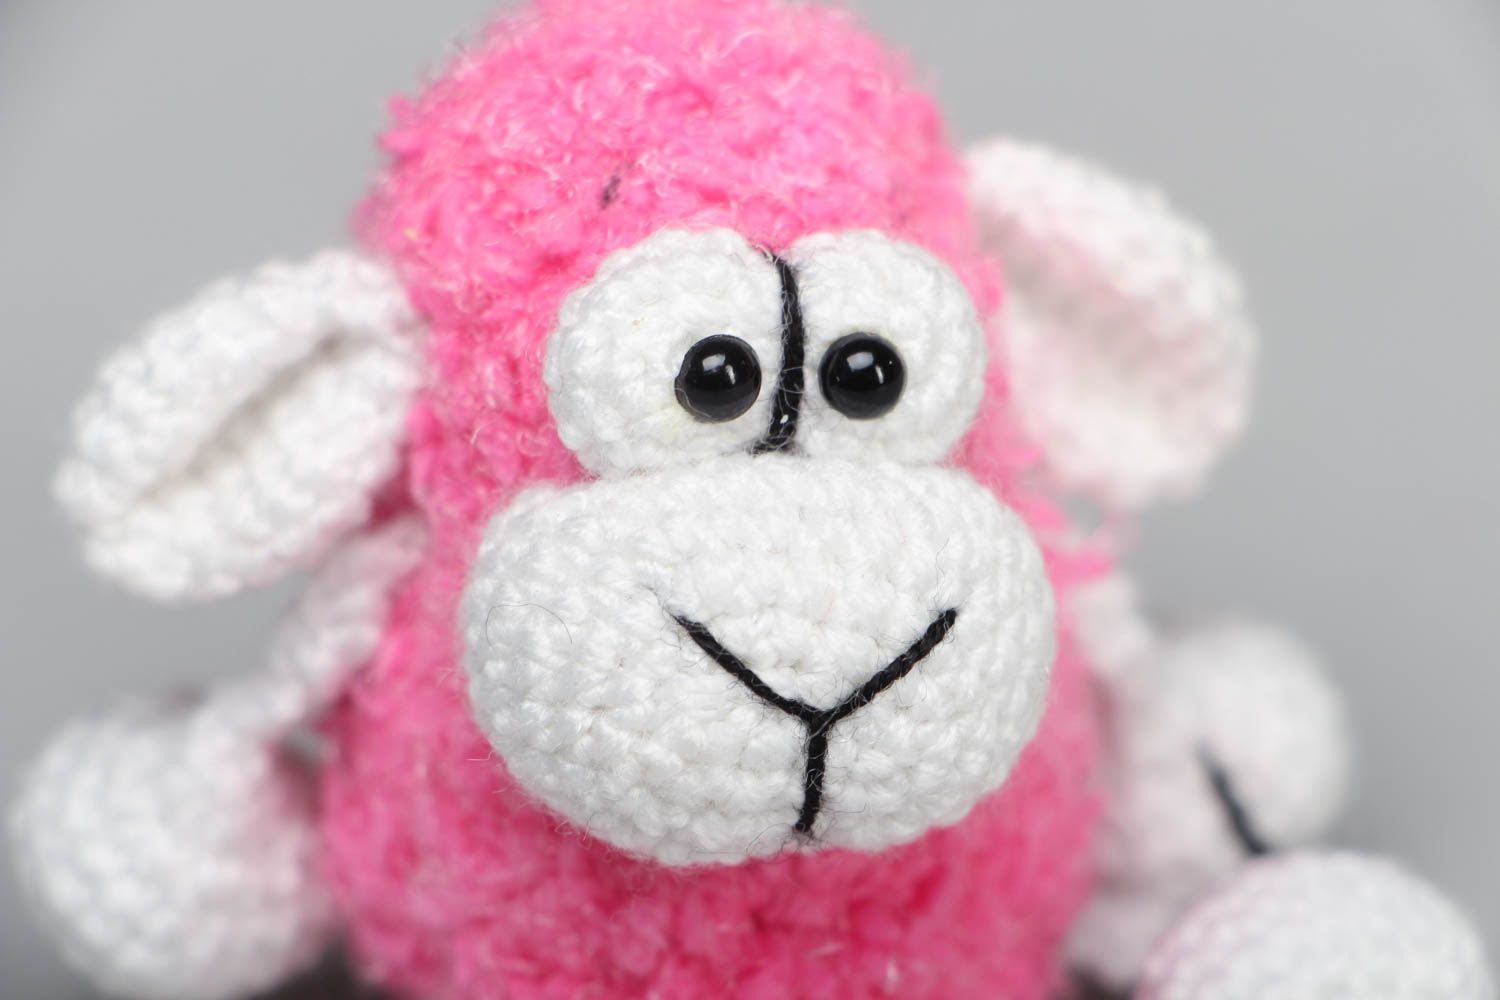 Crochet toy with eyelet photo 2